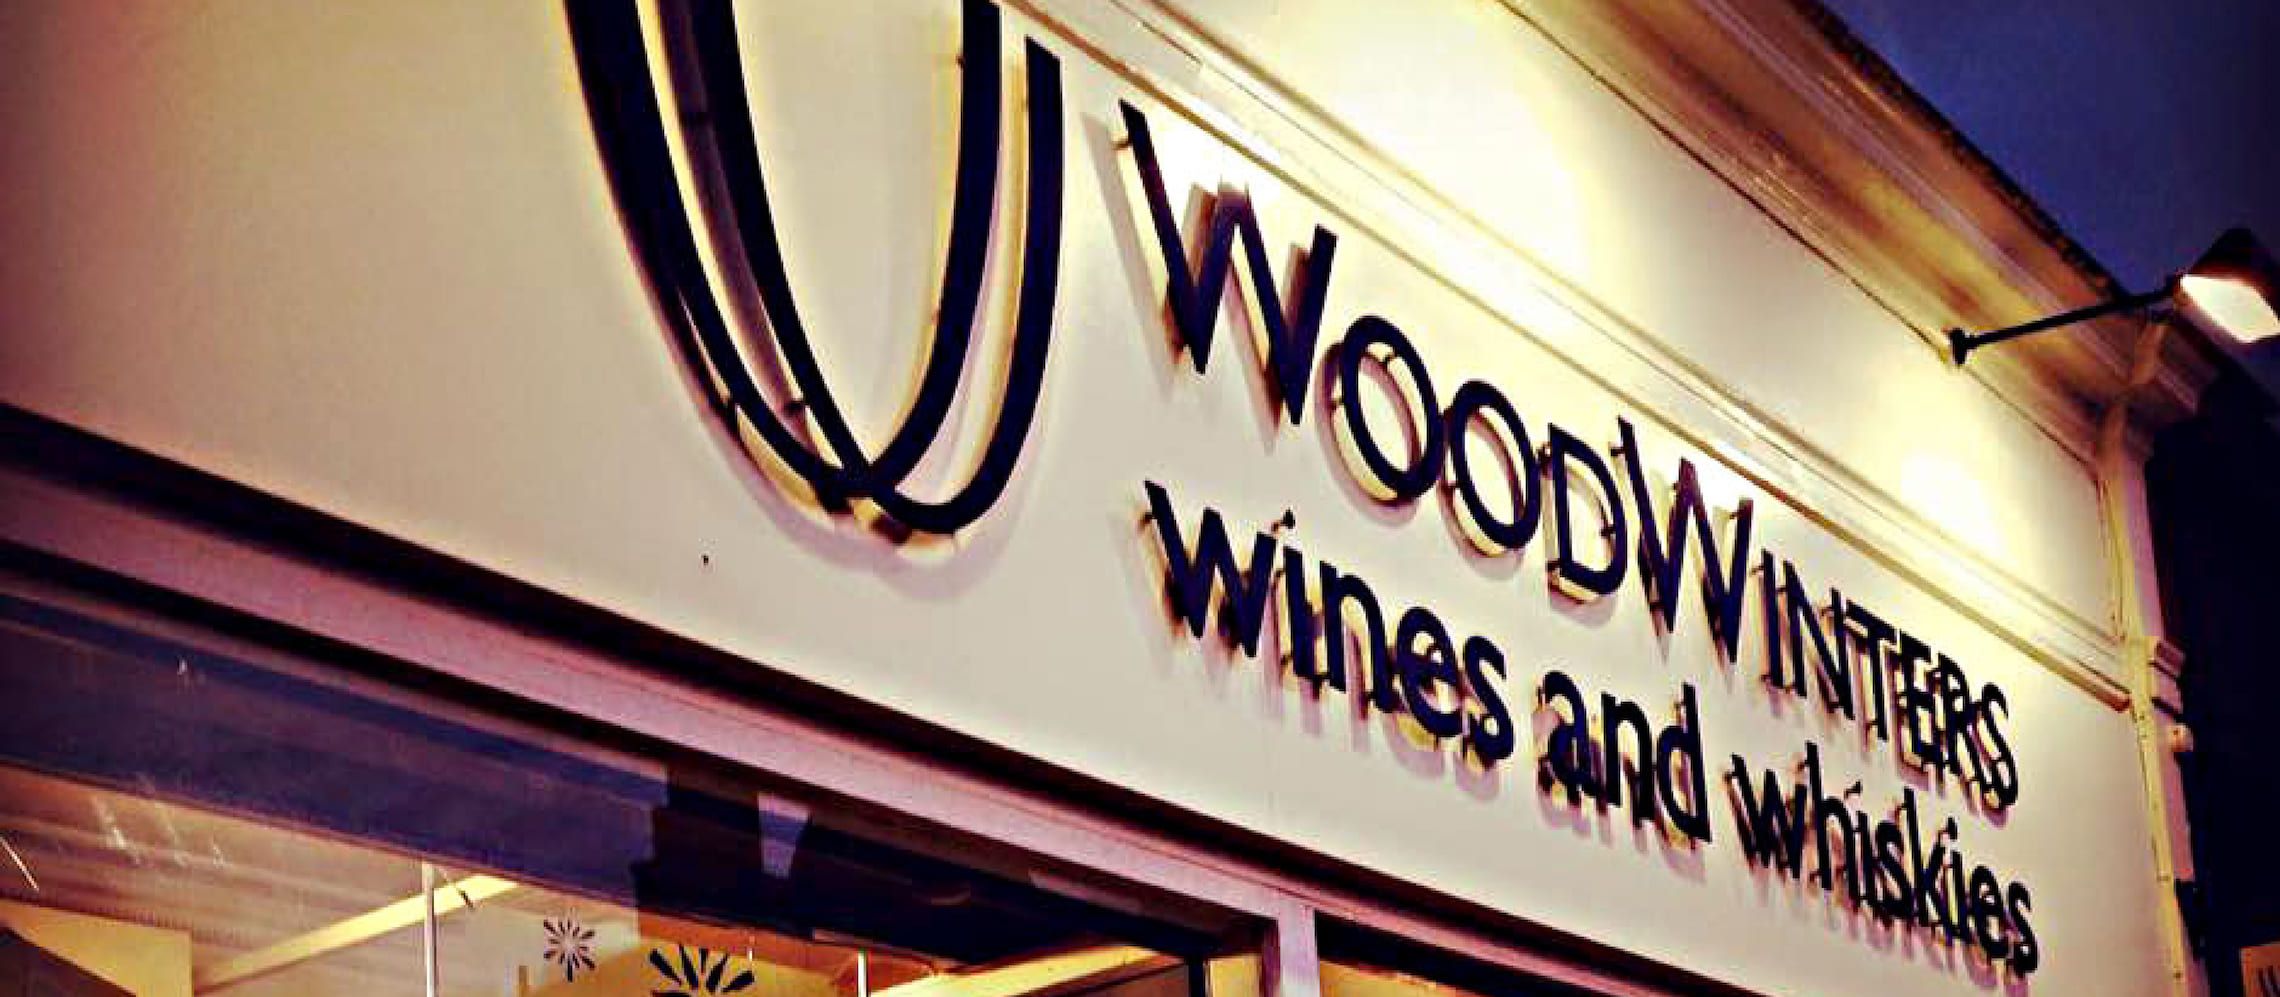 Photo for: An Interview with Andrew Johnson, Managing Director at Woodwinters, London